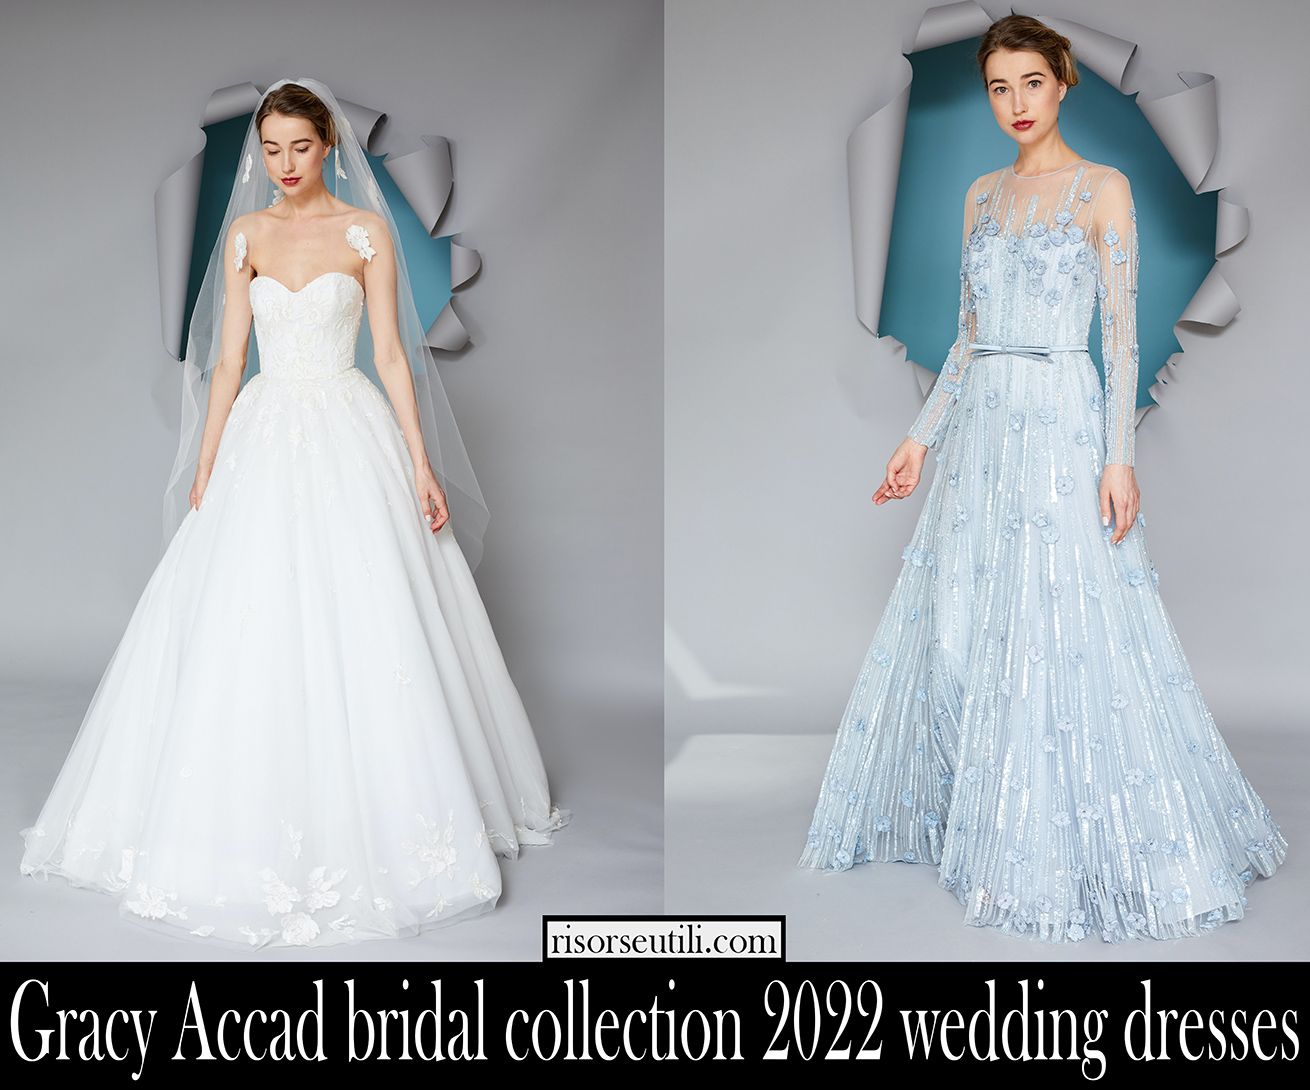 Gracy Accad bridal collection 2022 wedding dresses